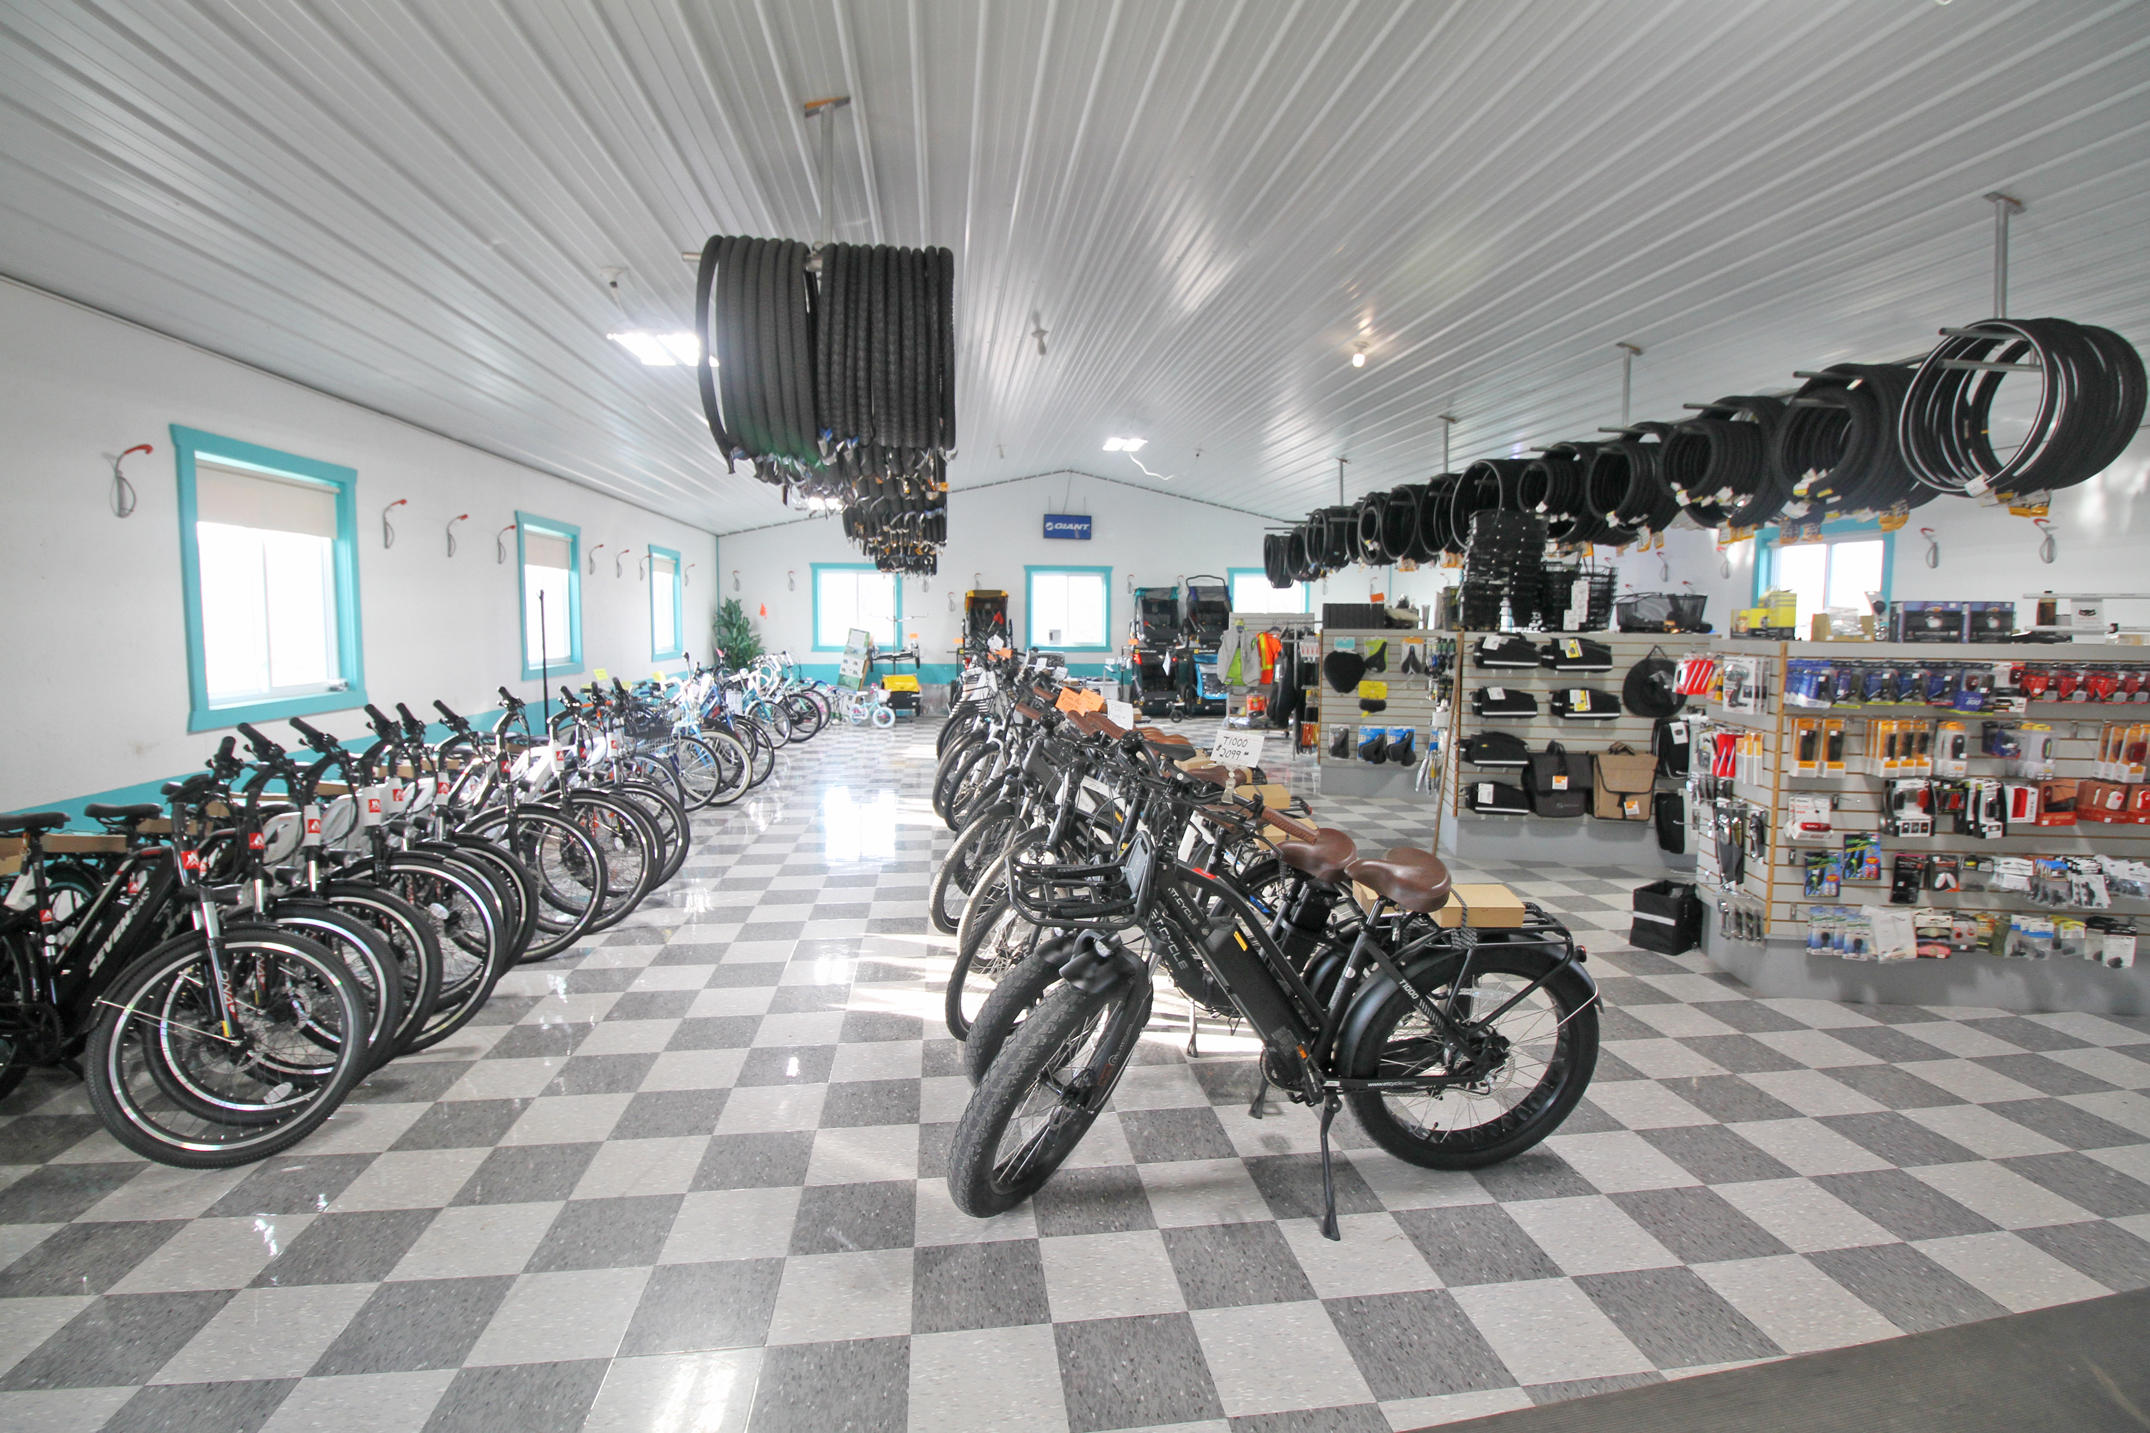 Straight answers with an extensive selection of top brands of E-Bike, conventional bikes, kids bikes, aluminum flat bars, hybrids, trailers and accessories.

Our attention to detail will give you the best riding experience. When fitting your bike, we consider all variables like rider size, riding style and stamina.

Top brands, fair pricing and service leaves a lasting impact and will have you telling your friends. Our wide variety of bikes from Giant, Velec, E-Joe, Surface, Norco, I-Zip are in stock and ready to fit you. We offer E-Bikes with double the range, so you go further with less effort and more pleasure. We also carry Burley bike trailers!